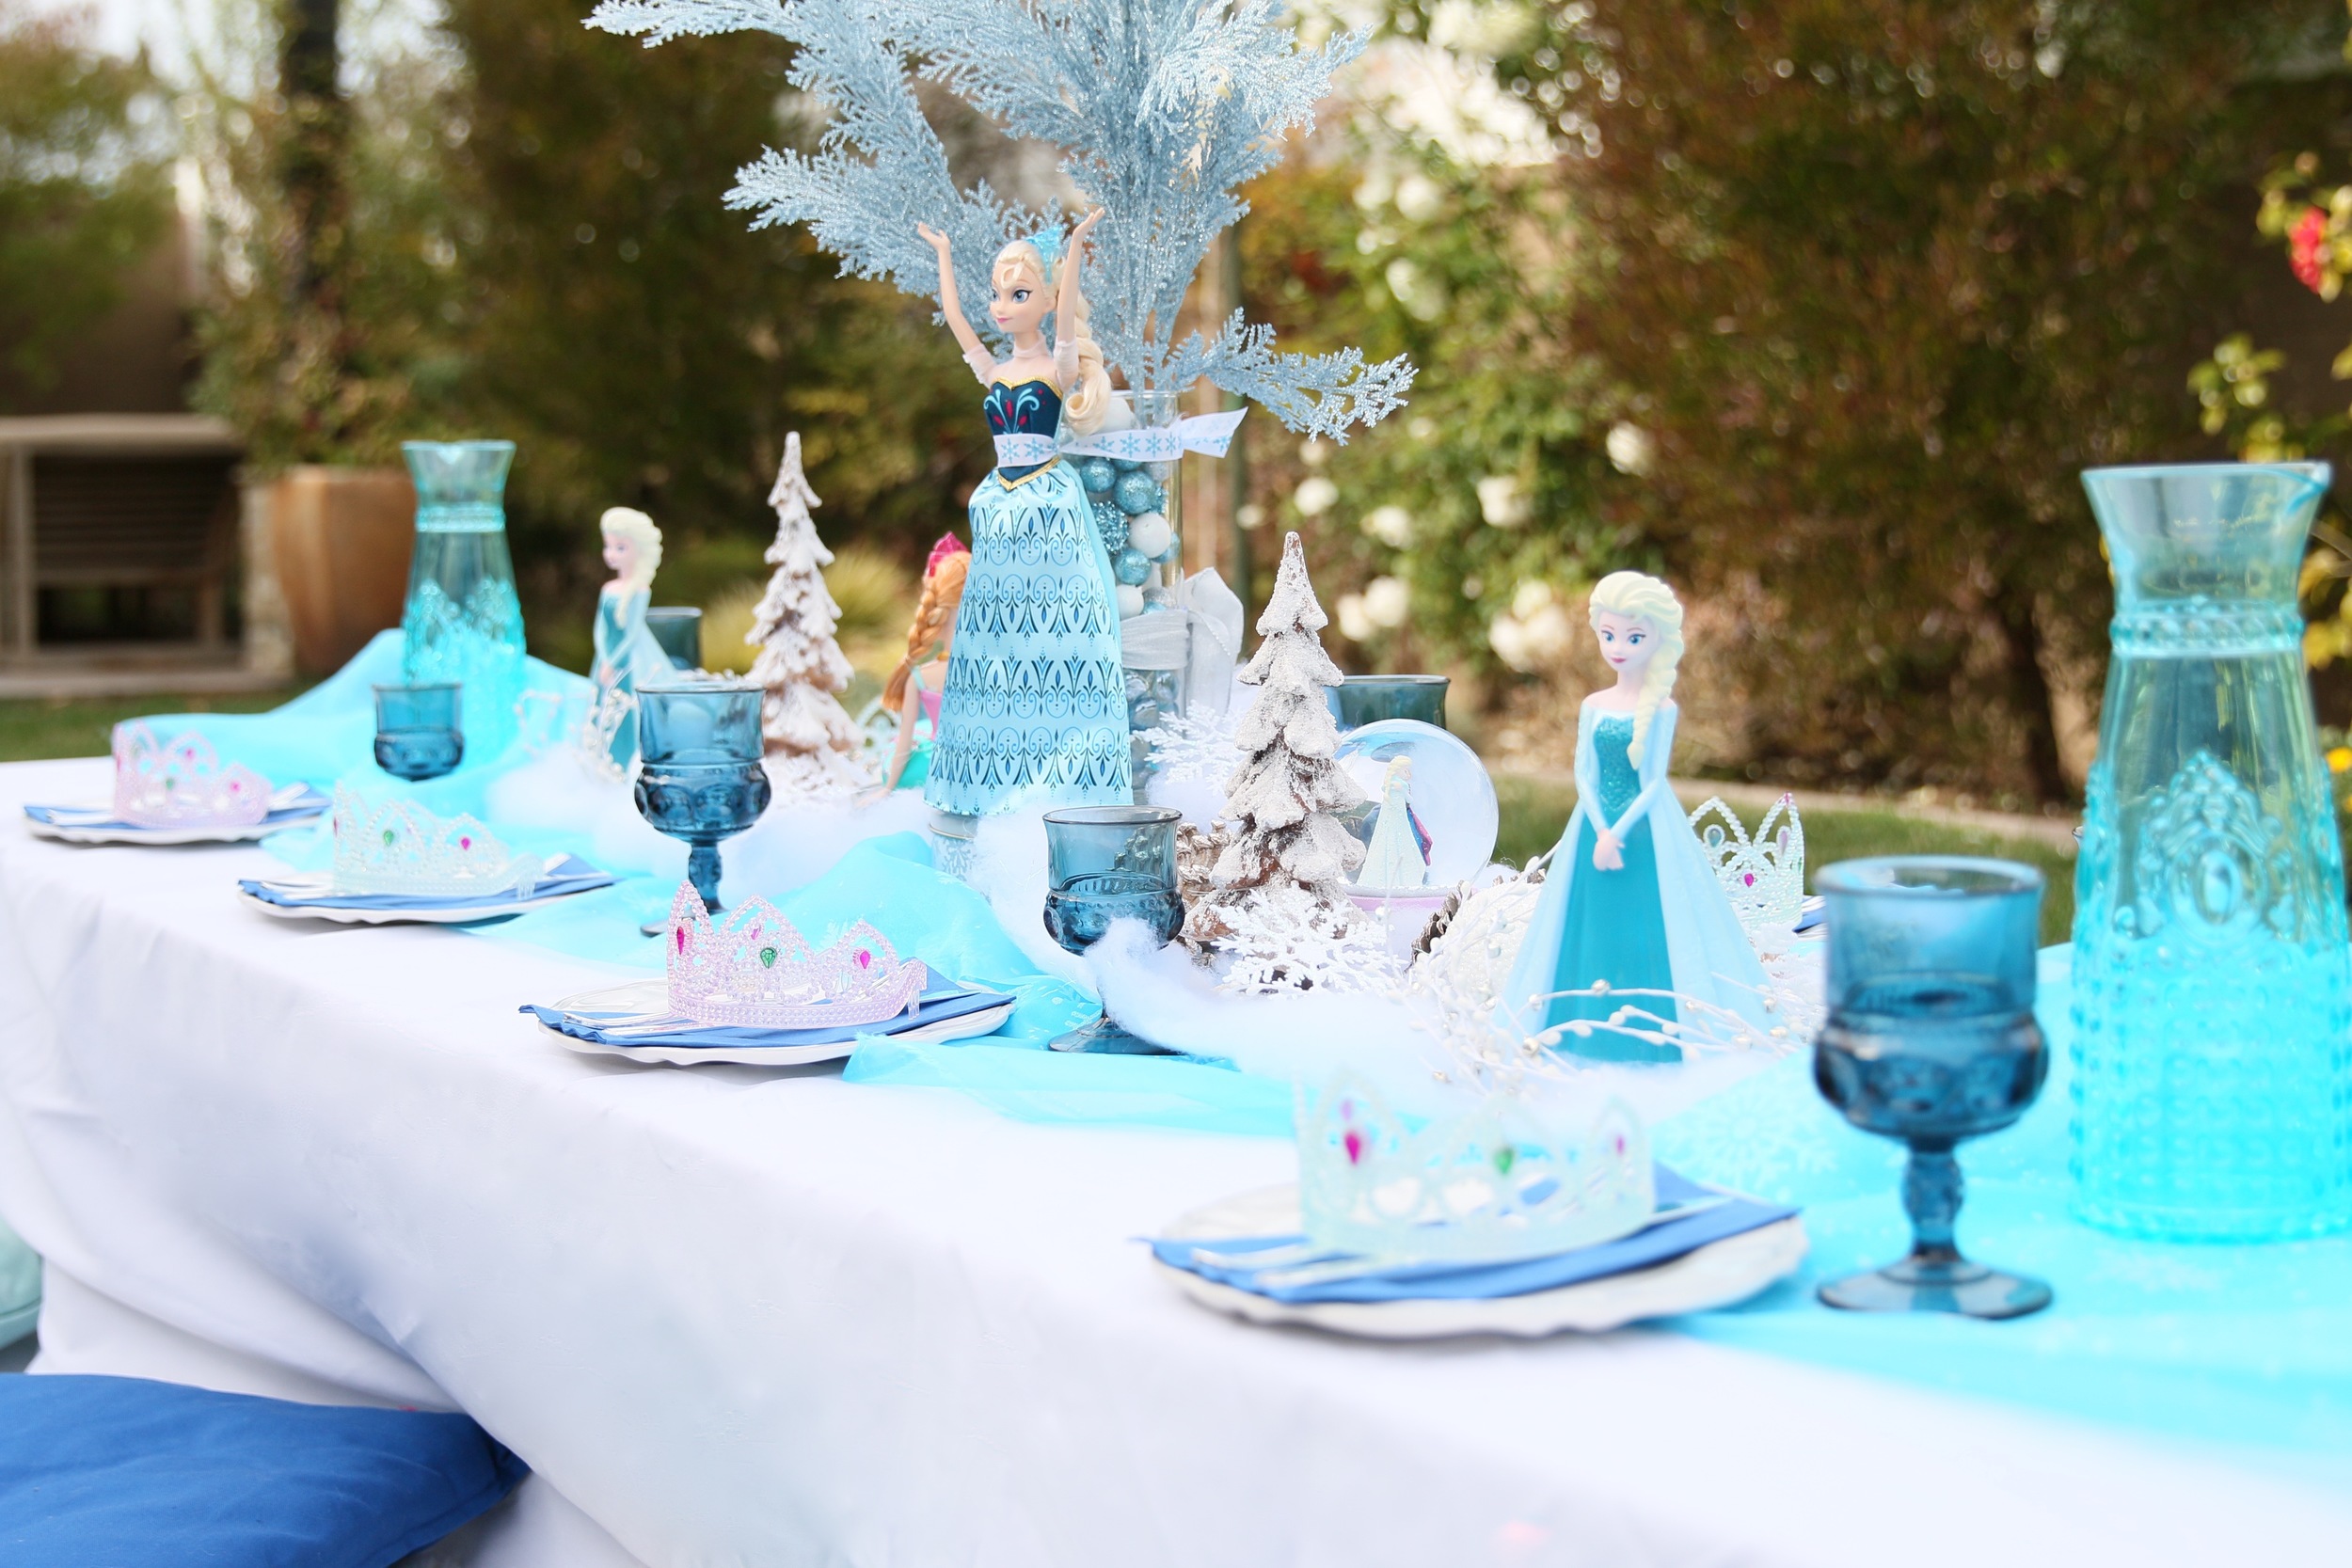 Copy of An impecable FROZEN table setup - All for rent! @inJOYtheParty